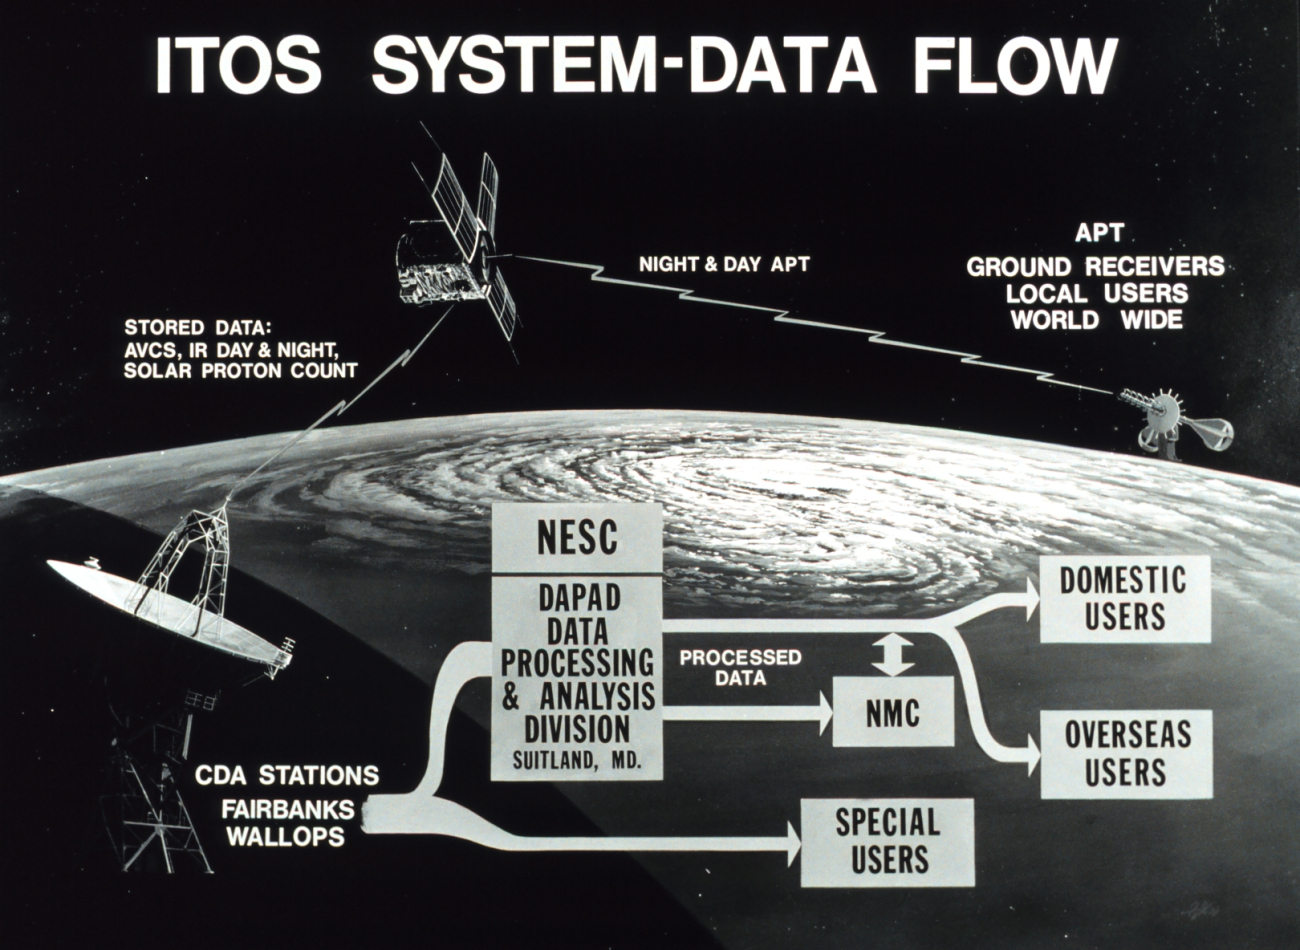 Graphic of ITOS system data flow